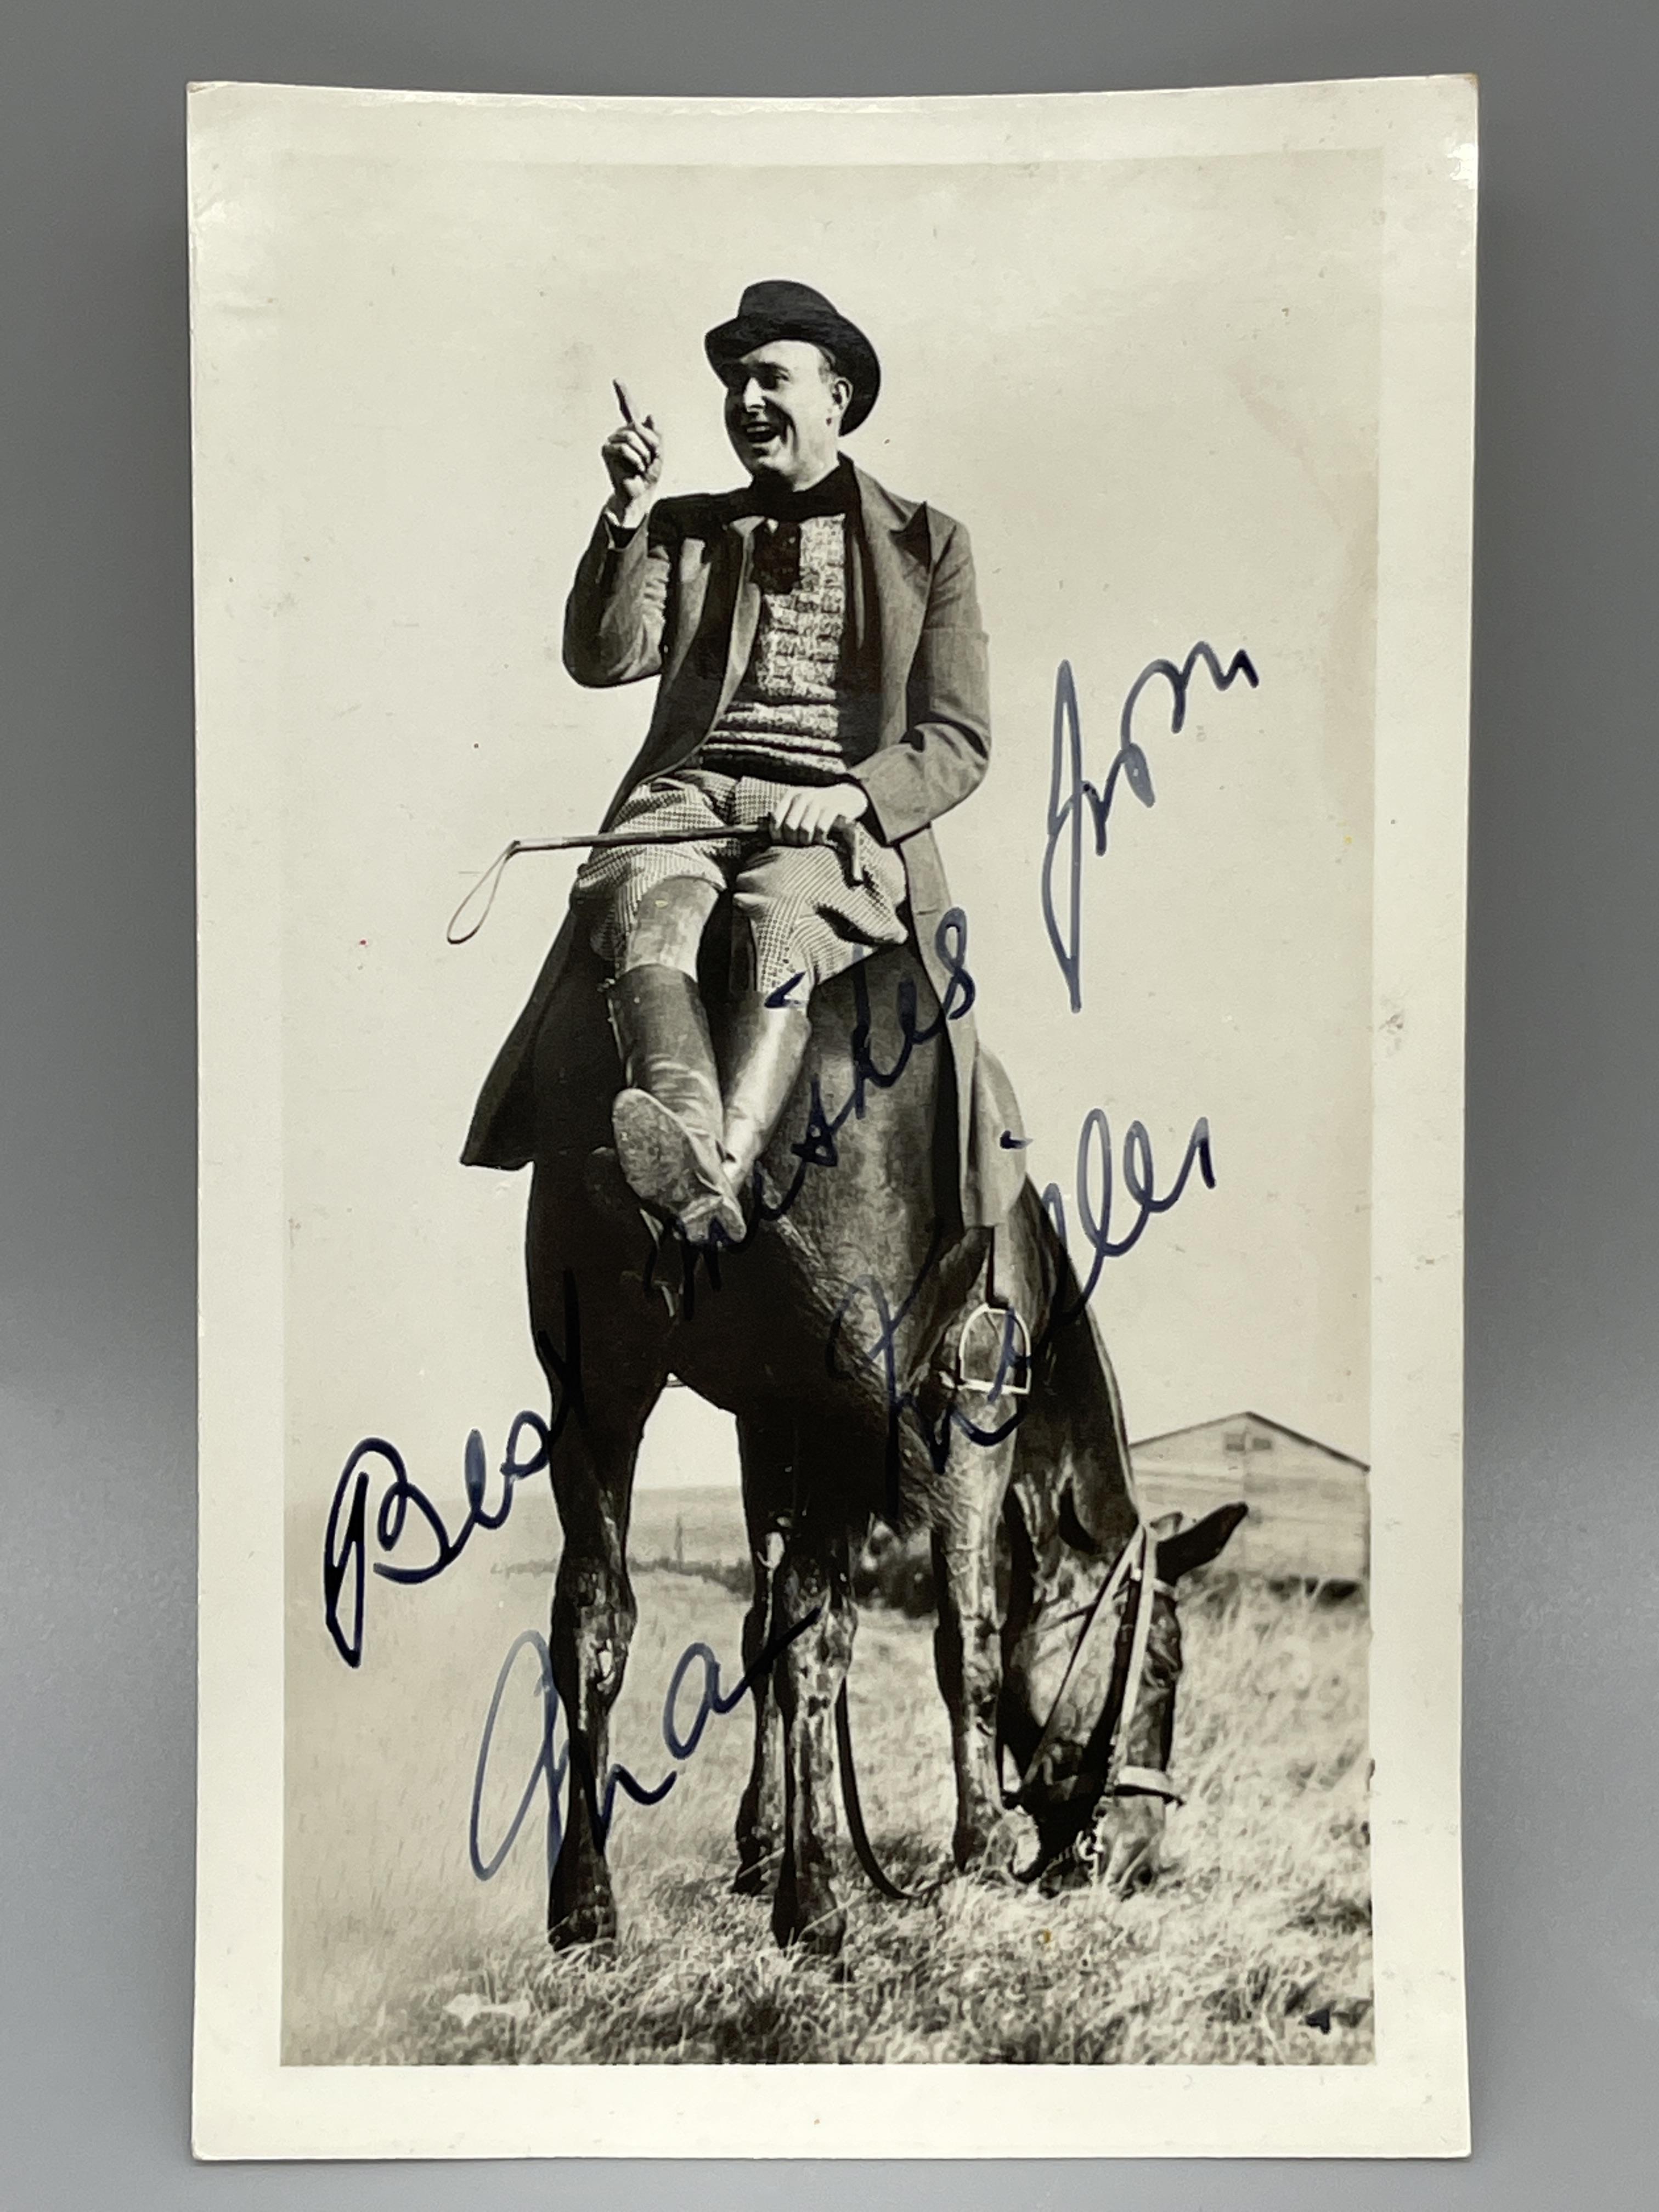 Autographed Max Miller Photograph - Image 2 of 4